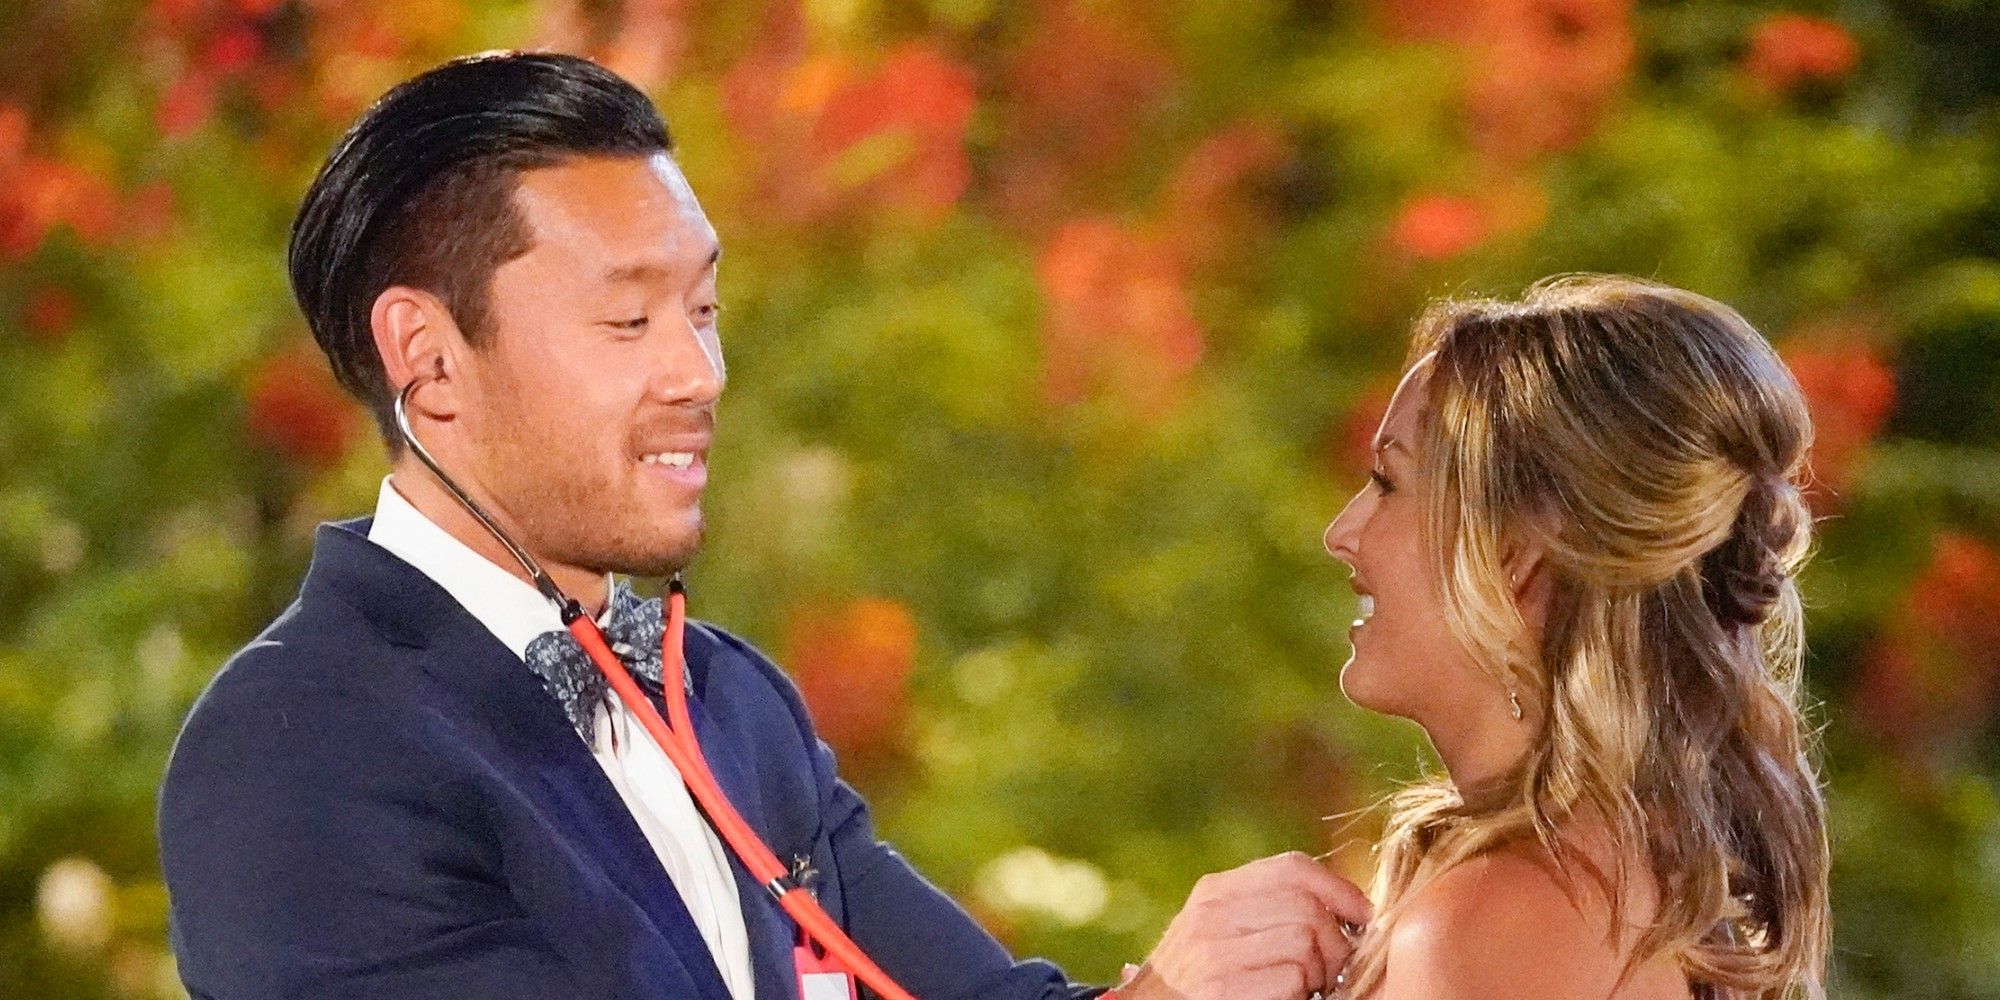 15 Of The Most Fame-Hungry Contestants From The Bachelor 